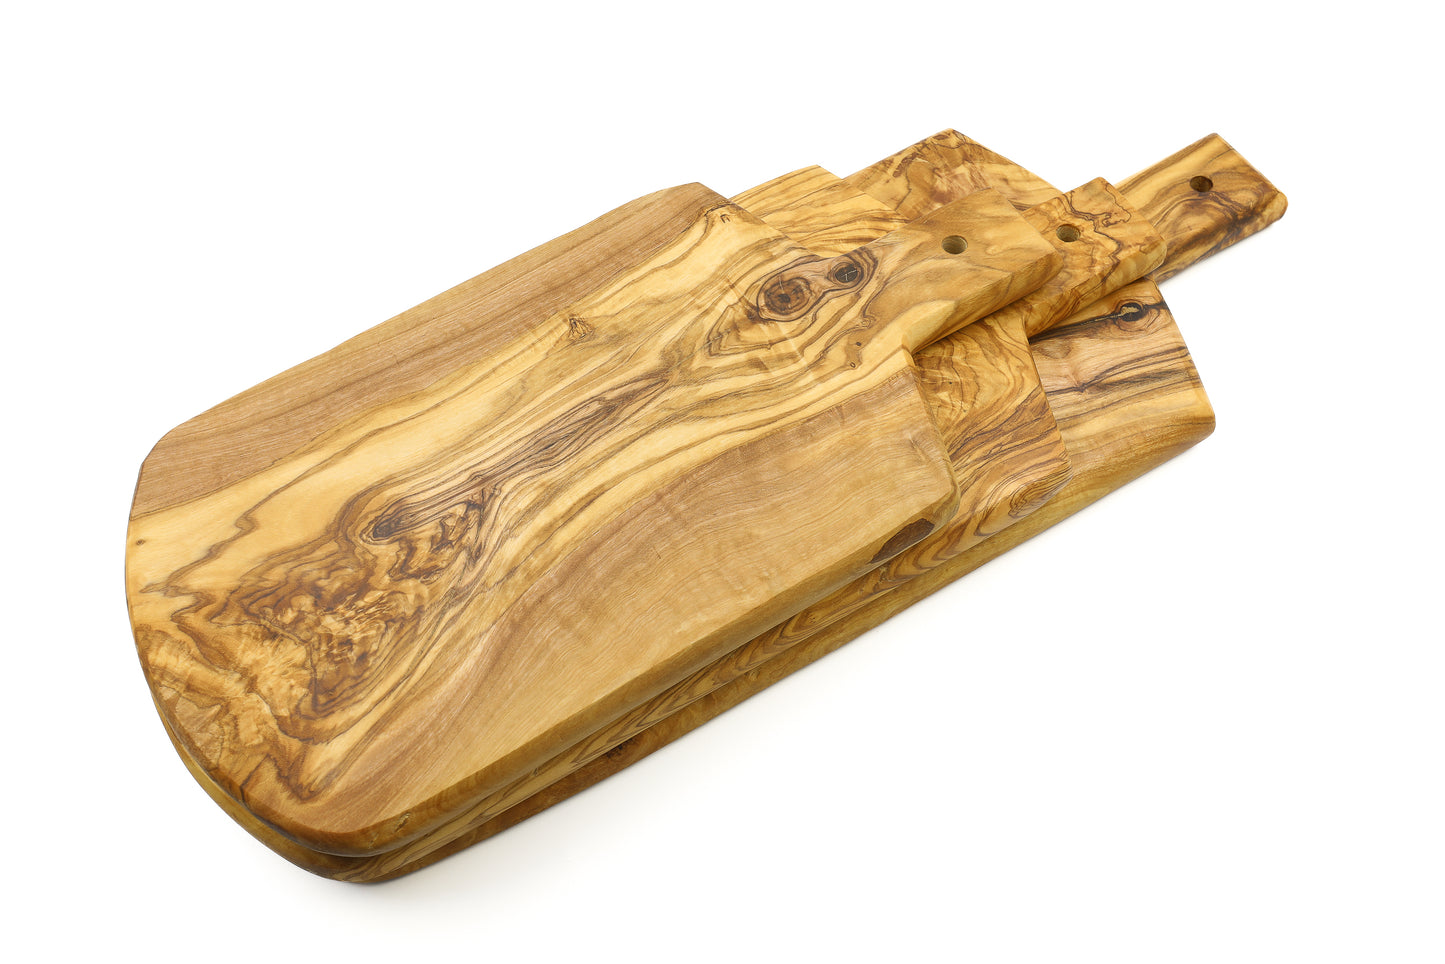 Olive wood shield-shaped serving board featuring a handle